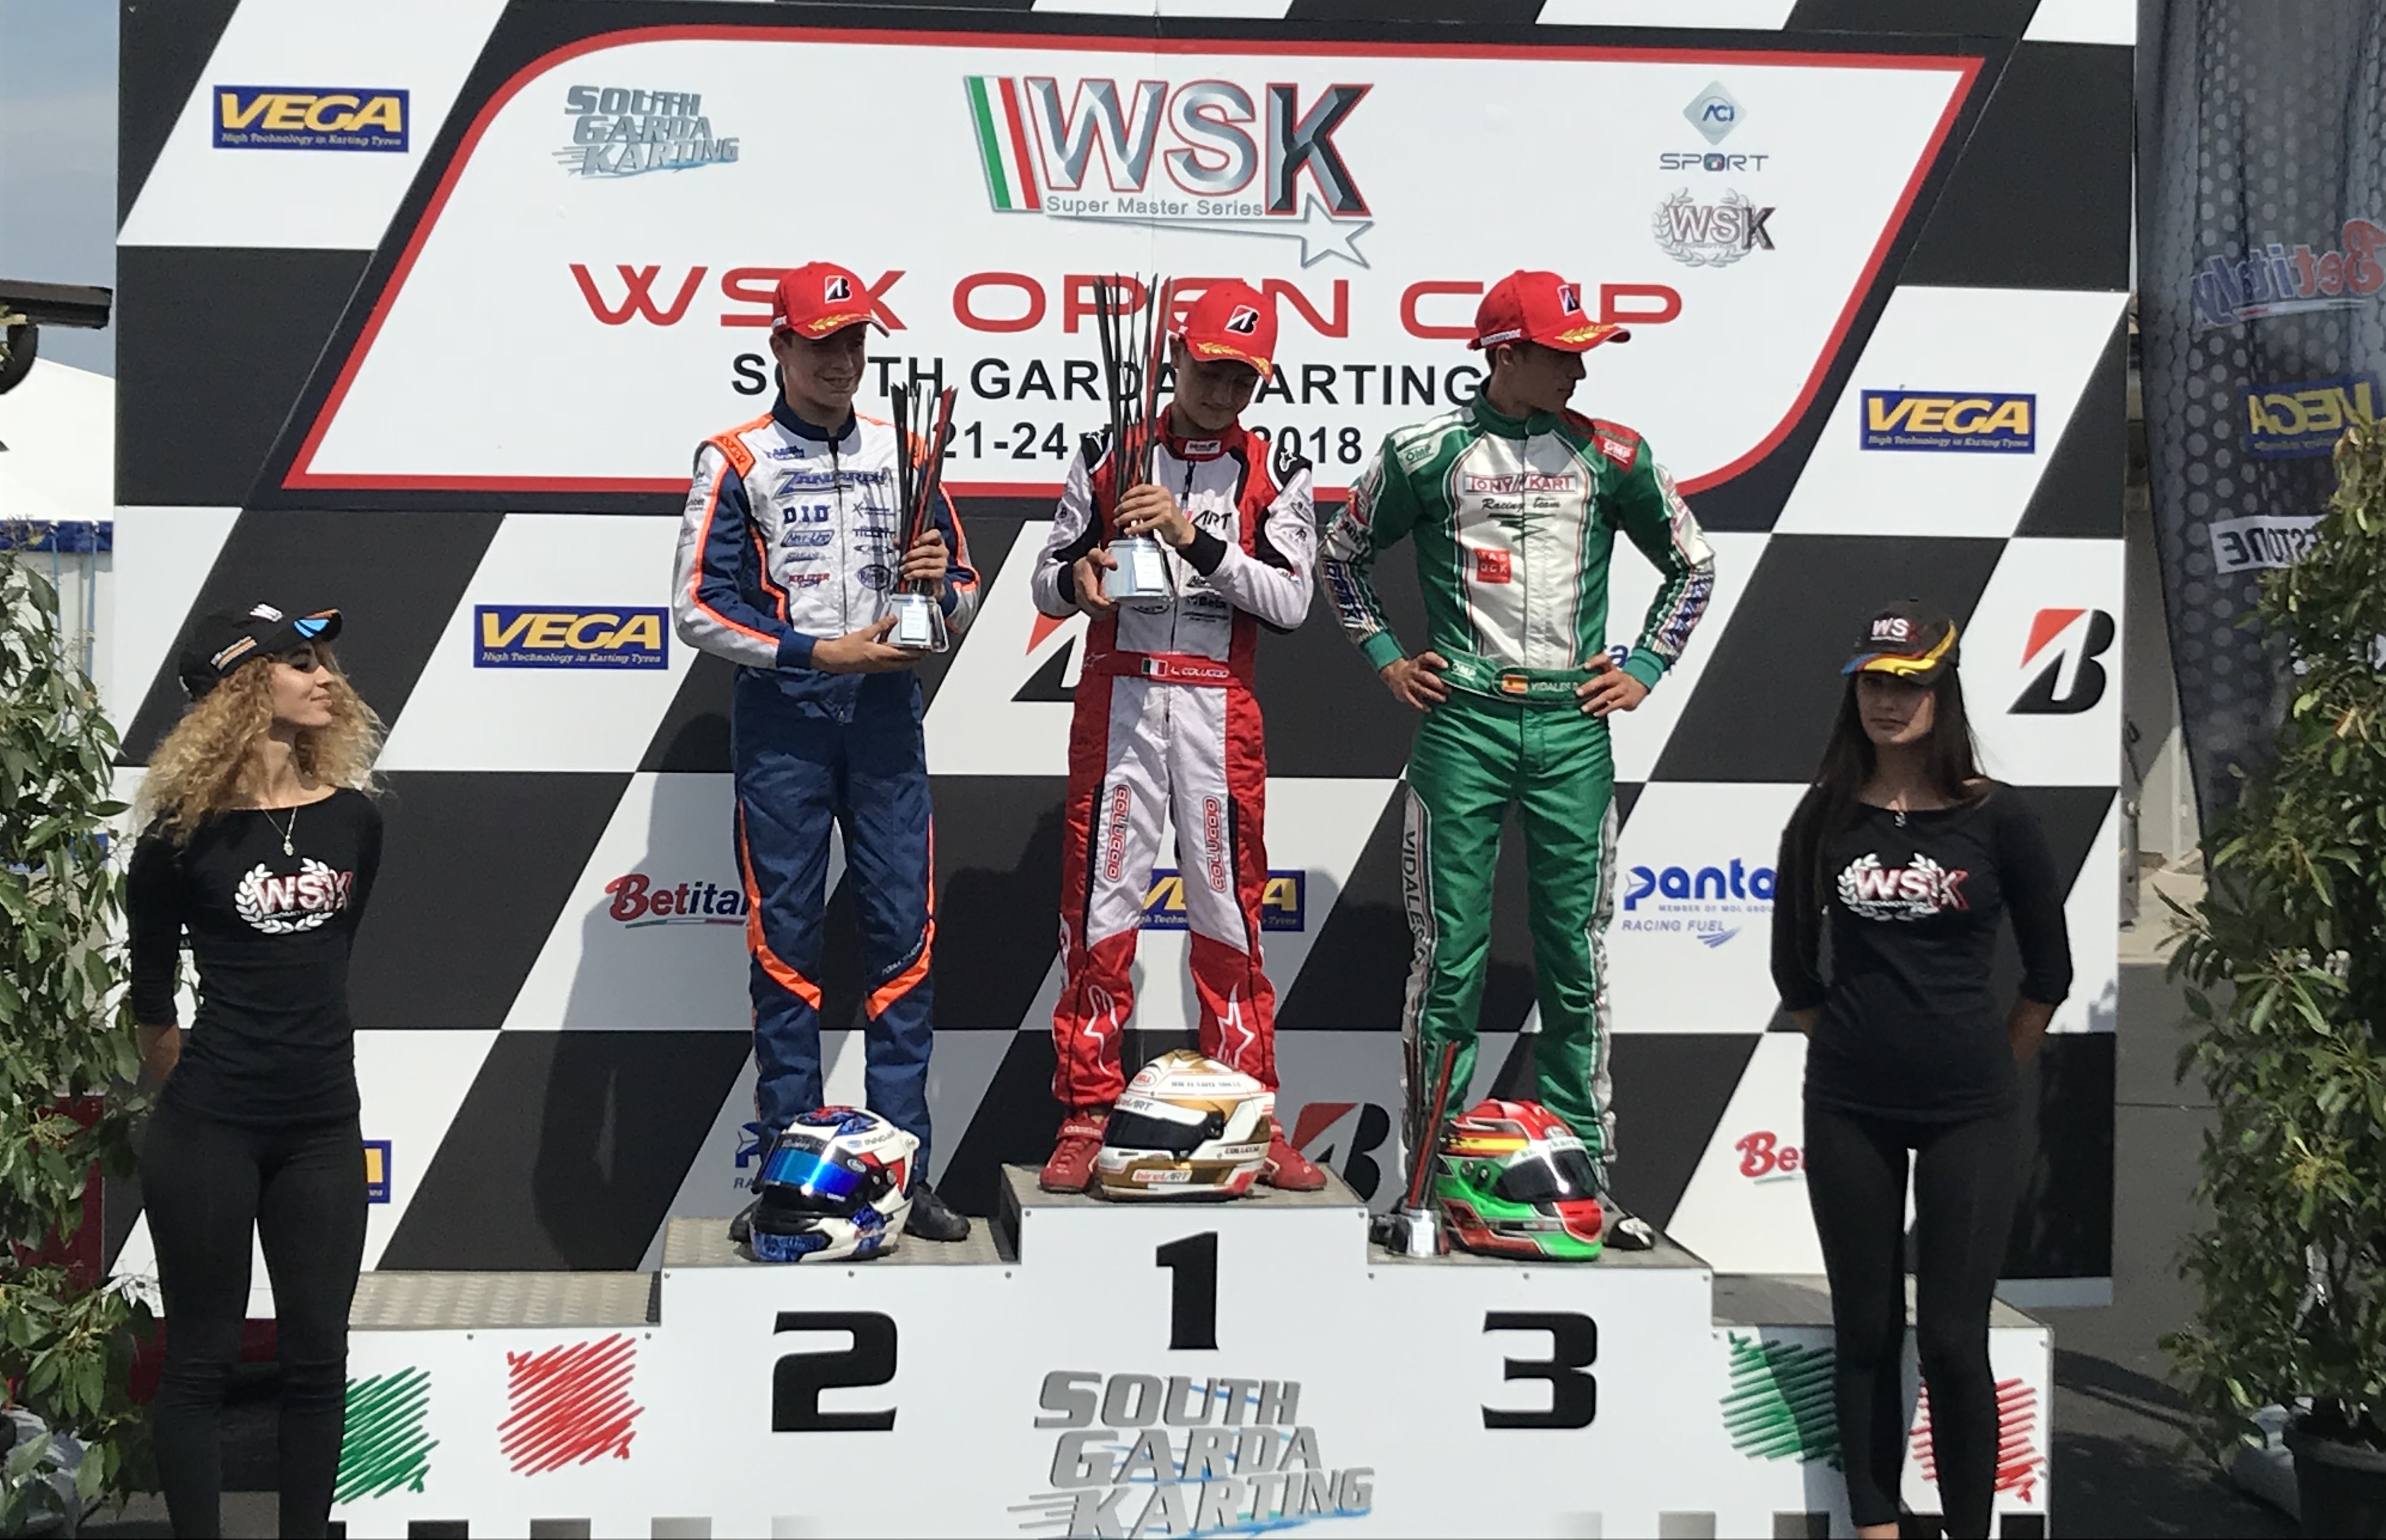 WSK Open Cup: the champions! - TKART - News, tips, tech about karting